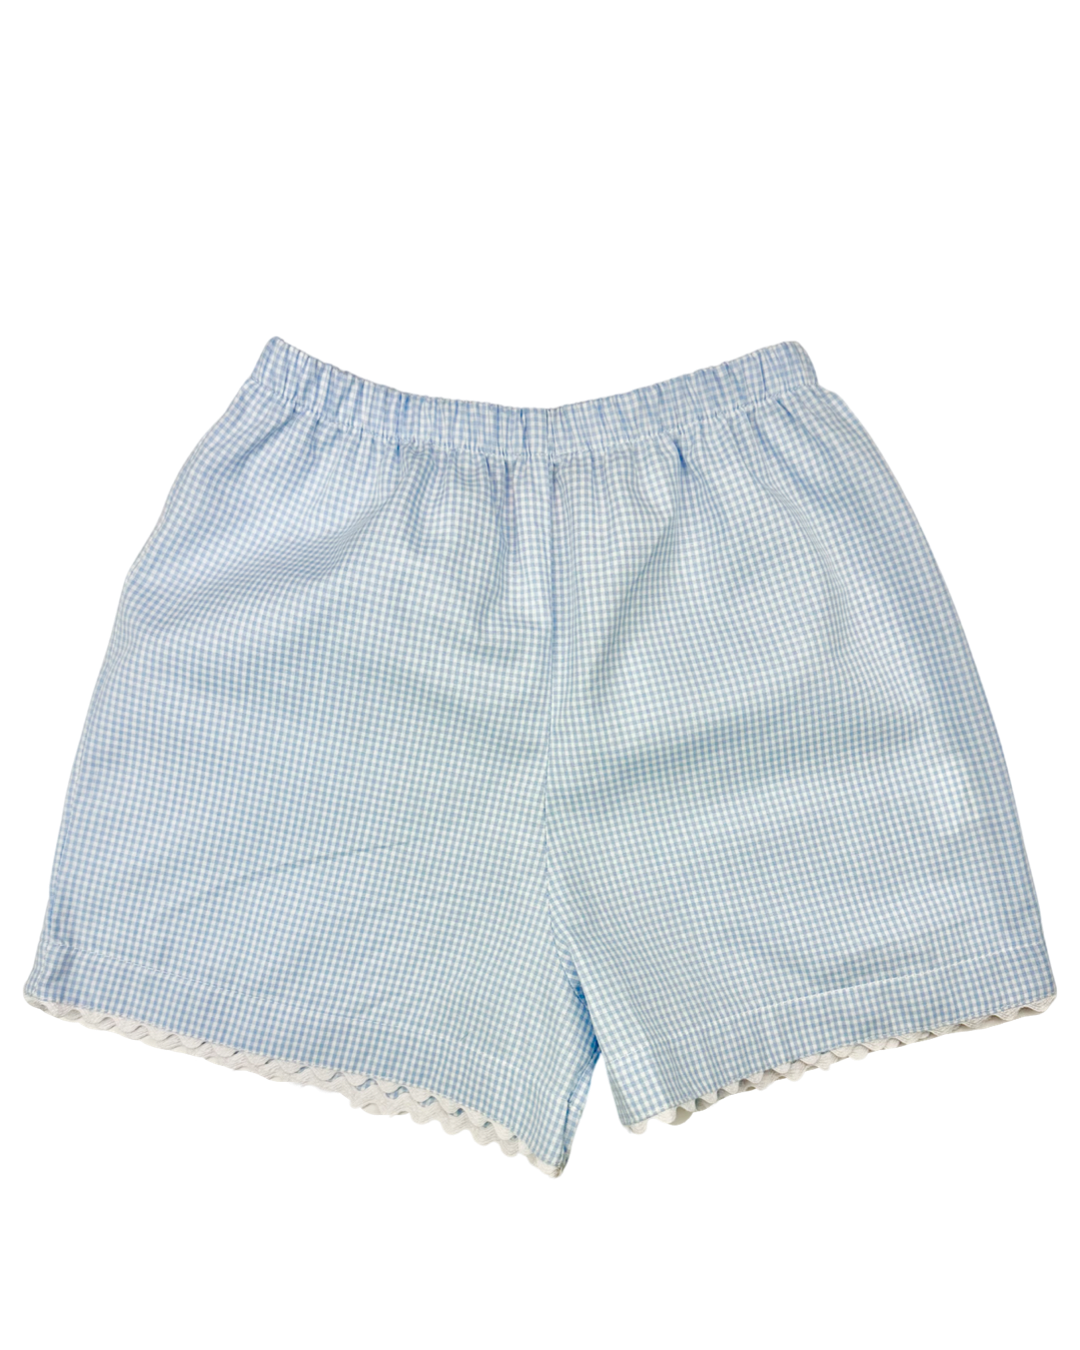 Two Pocket Short - Baby Blue Gingham (Size 5)